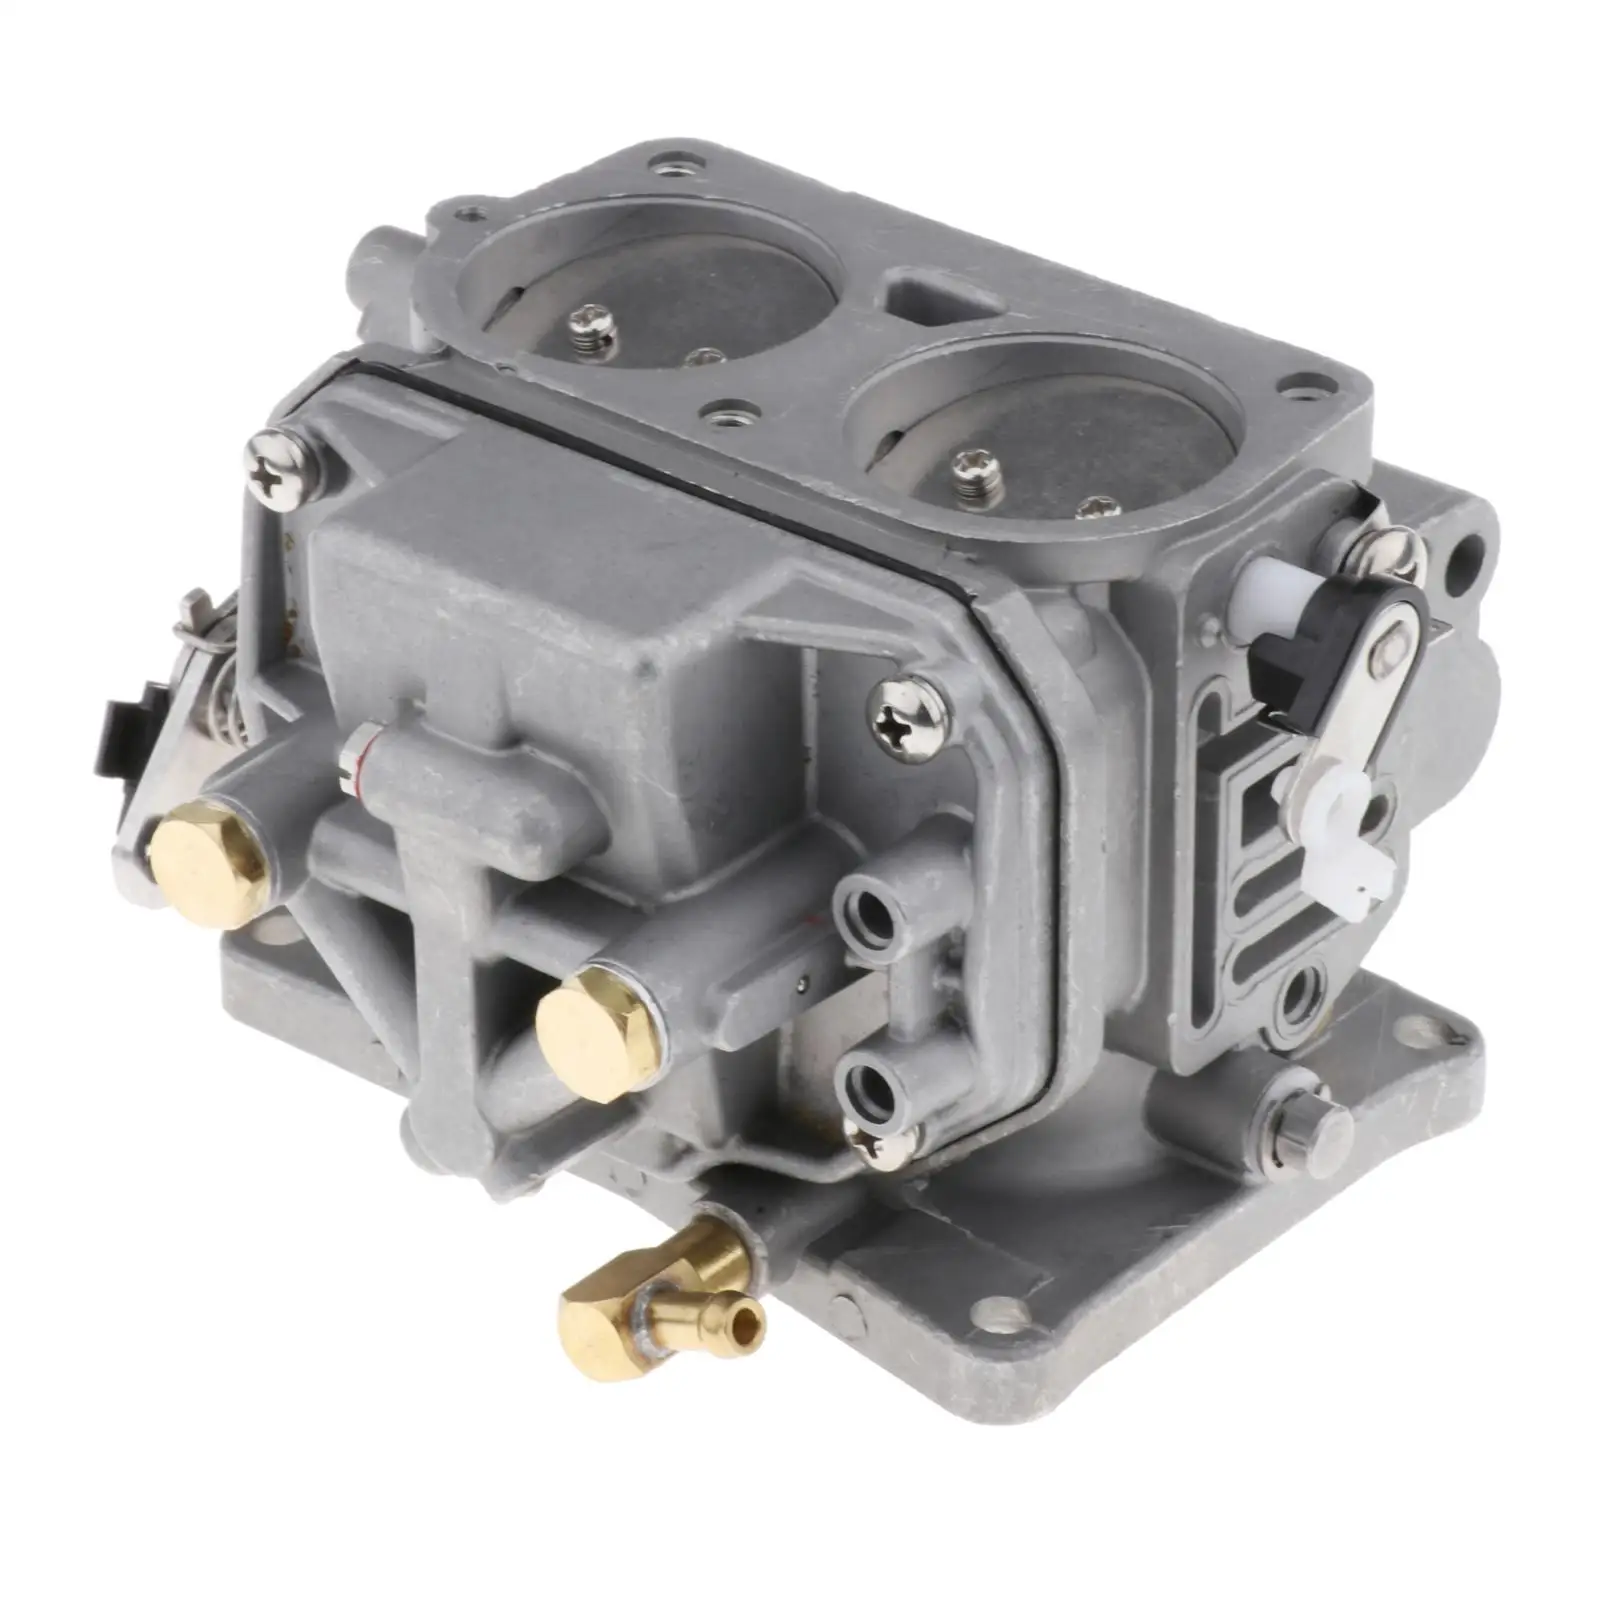 

Carburetor Carburetor for 40HP J 1986 1993 for Chinese Parsun T36J T40J Outboard Motor Replace 6F6 14 301 00 6F5 14 301 00